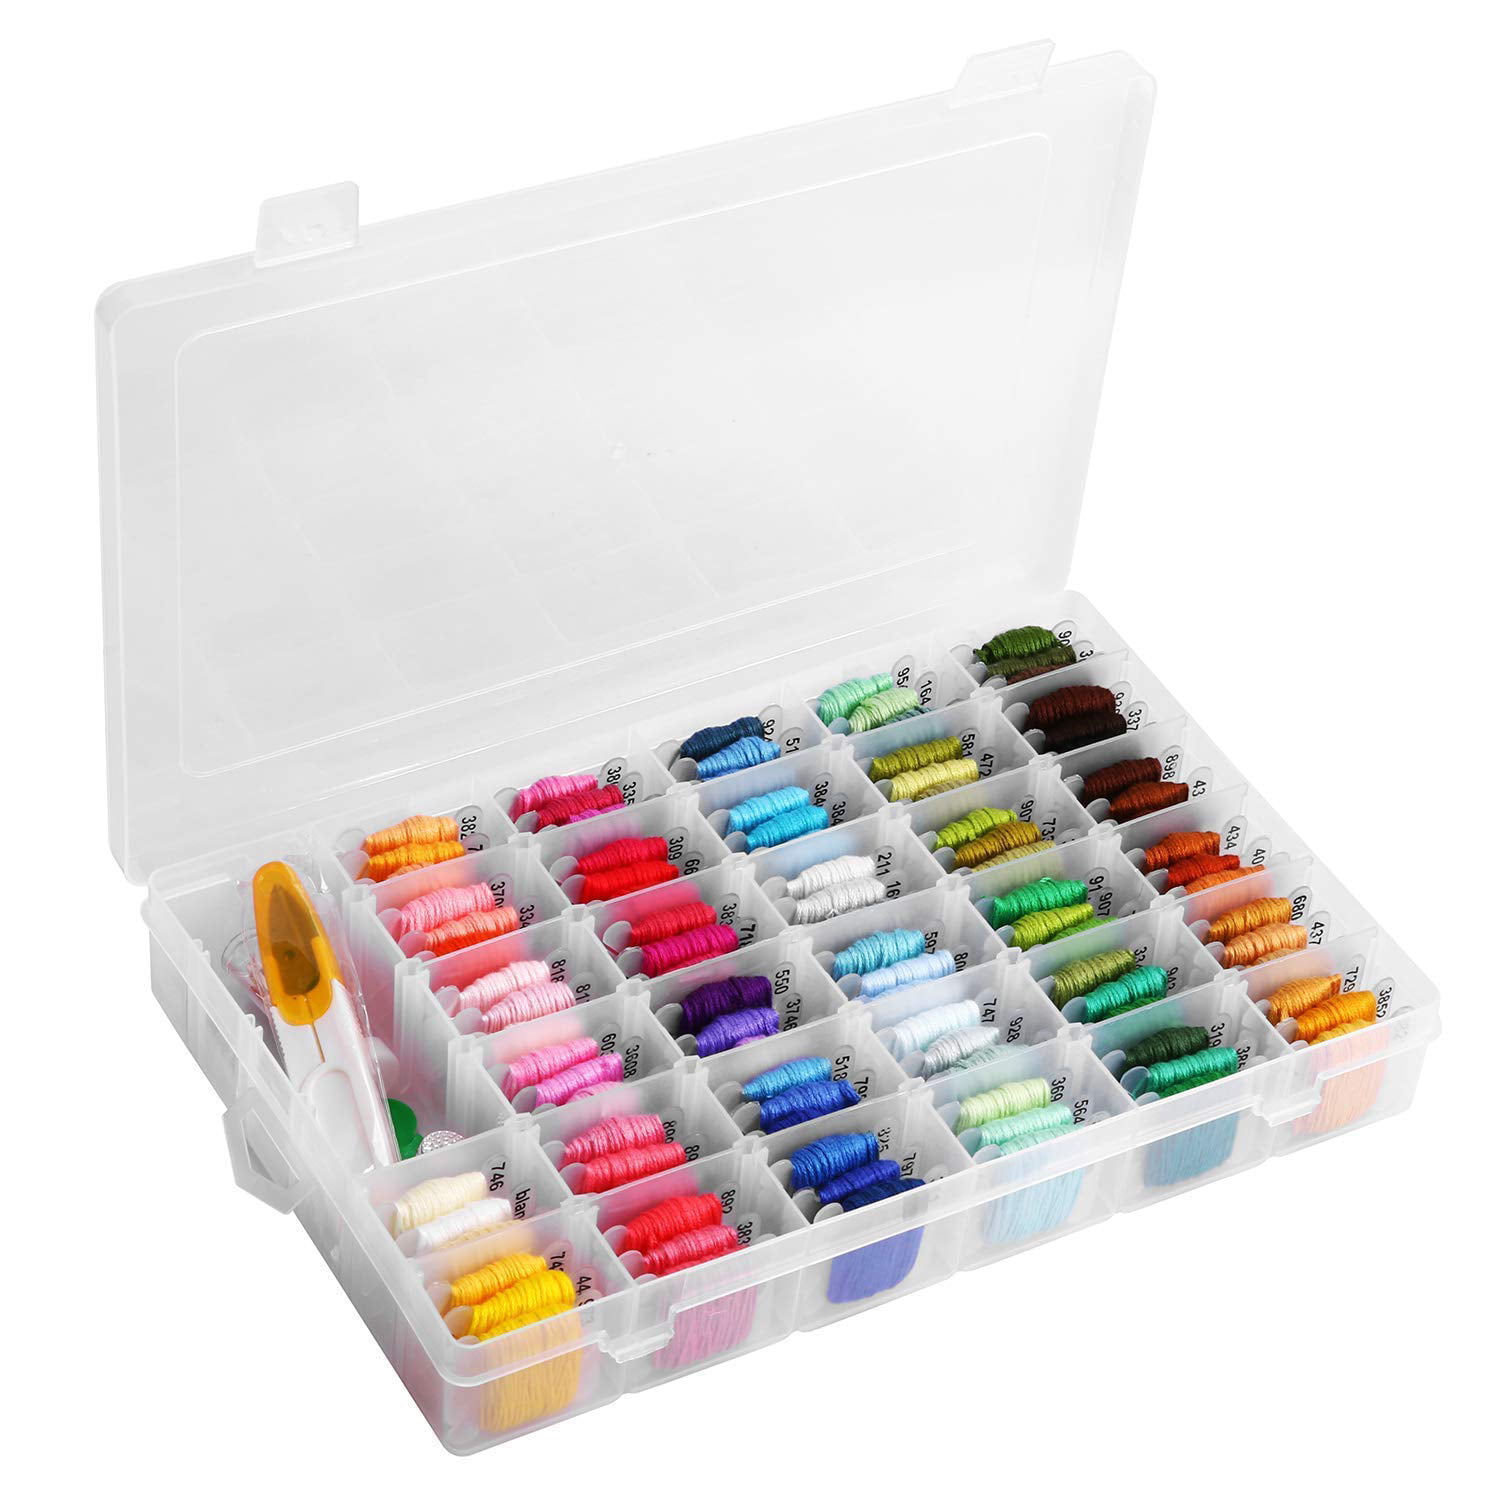 Floss BOBBINS Beads and Ribbons Friendship Bracelet String Embroidery Thread Bracelets Yarn 374 PCS 100 Premium DMC Color Embroidery Floss with Organizer Storage Box Cross Stitch KIT with Tools 